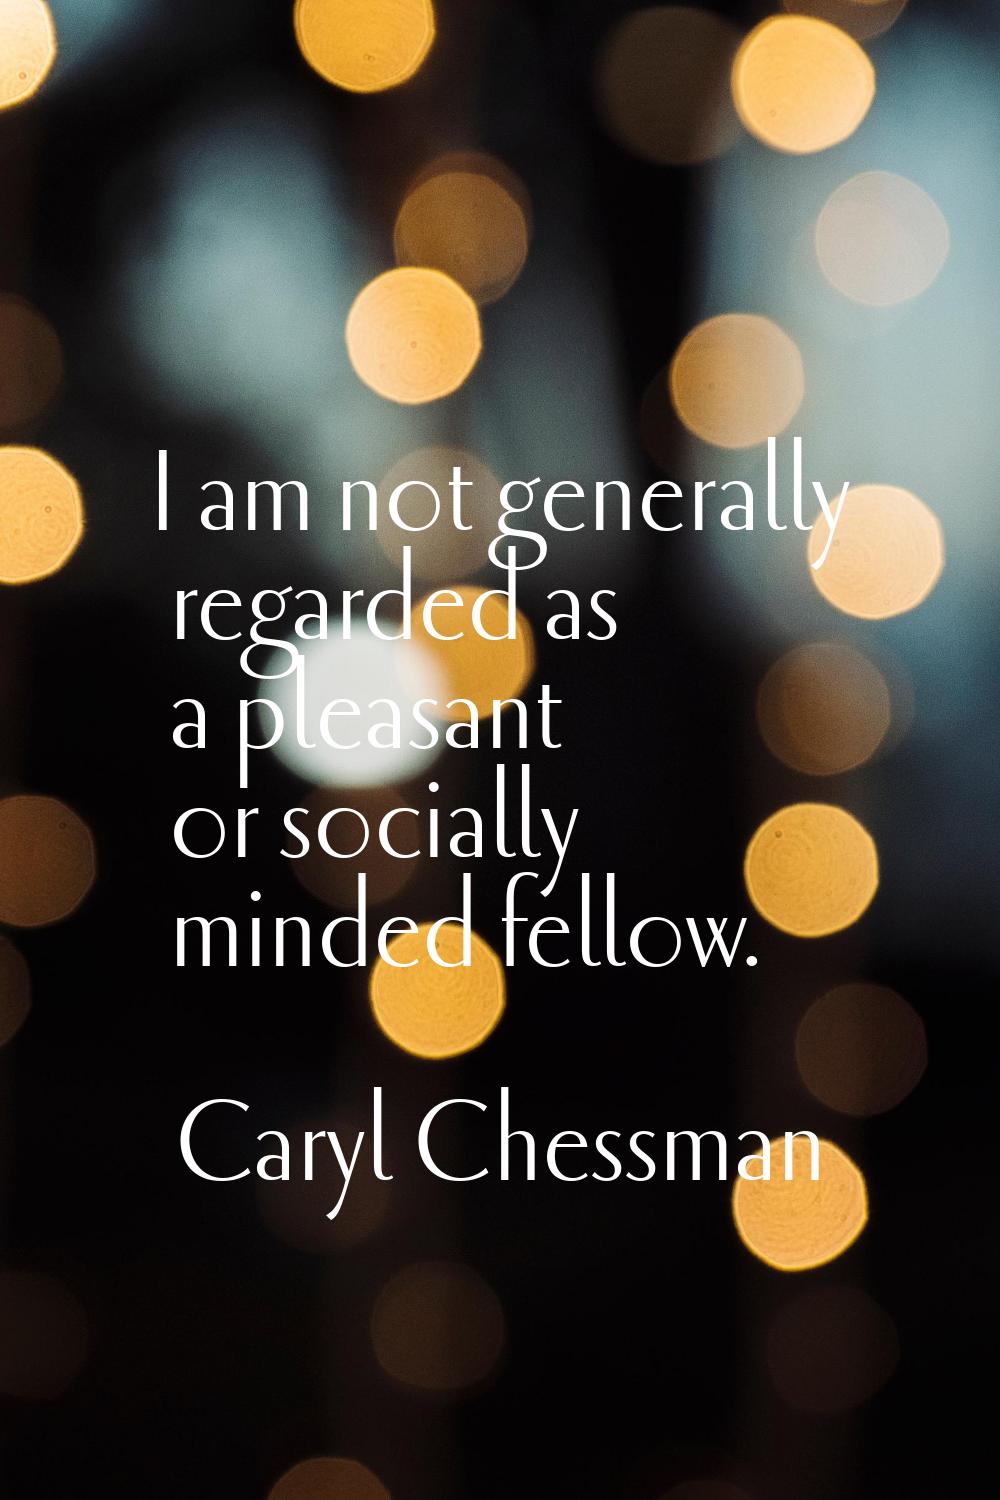 I am not generally regarded as a pleasant or socially minded fellow.